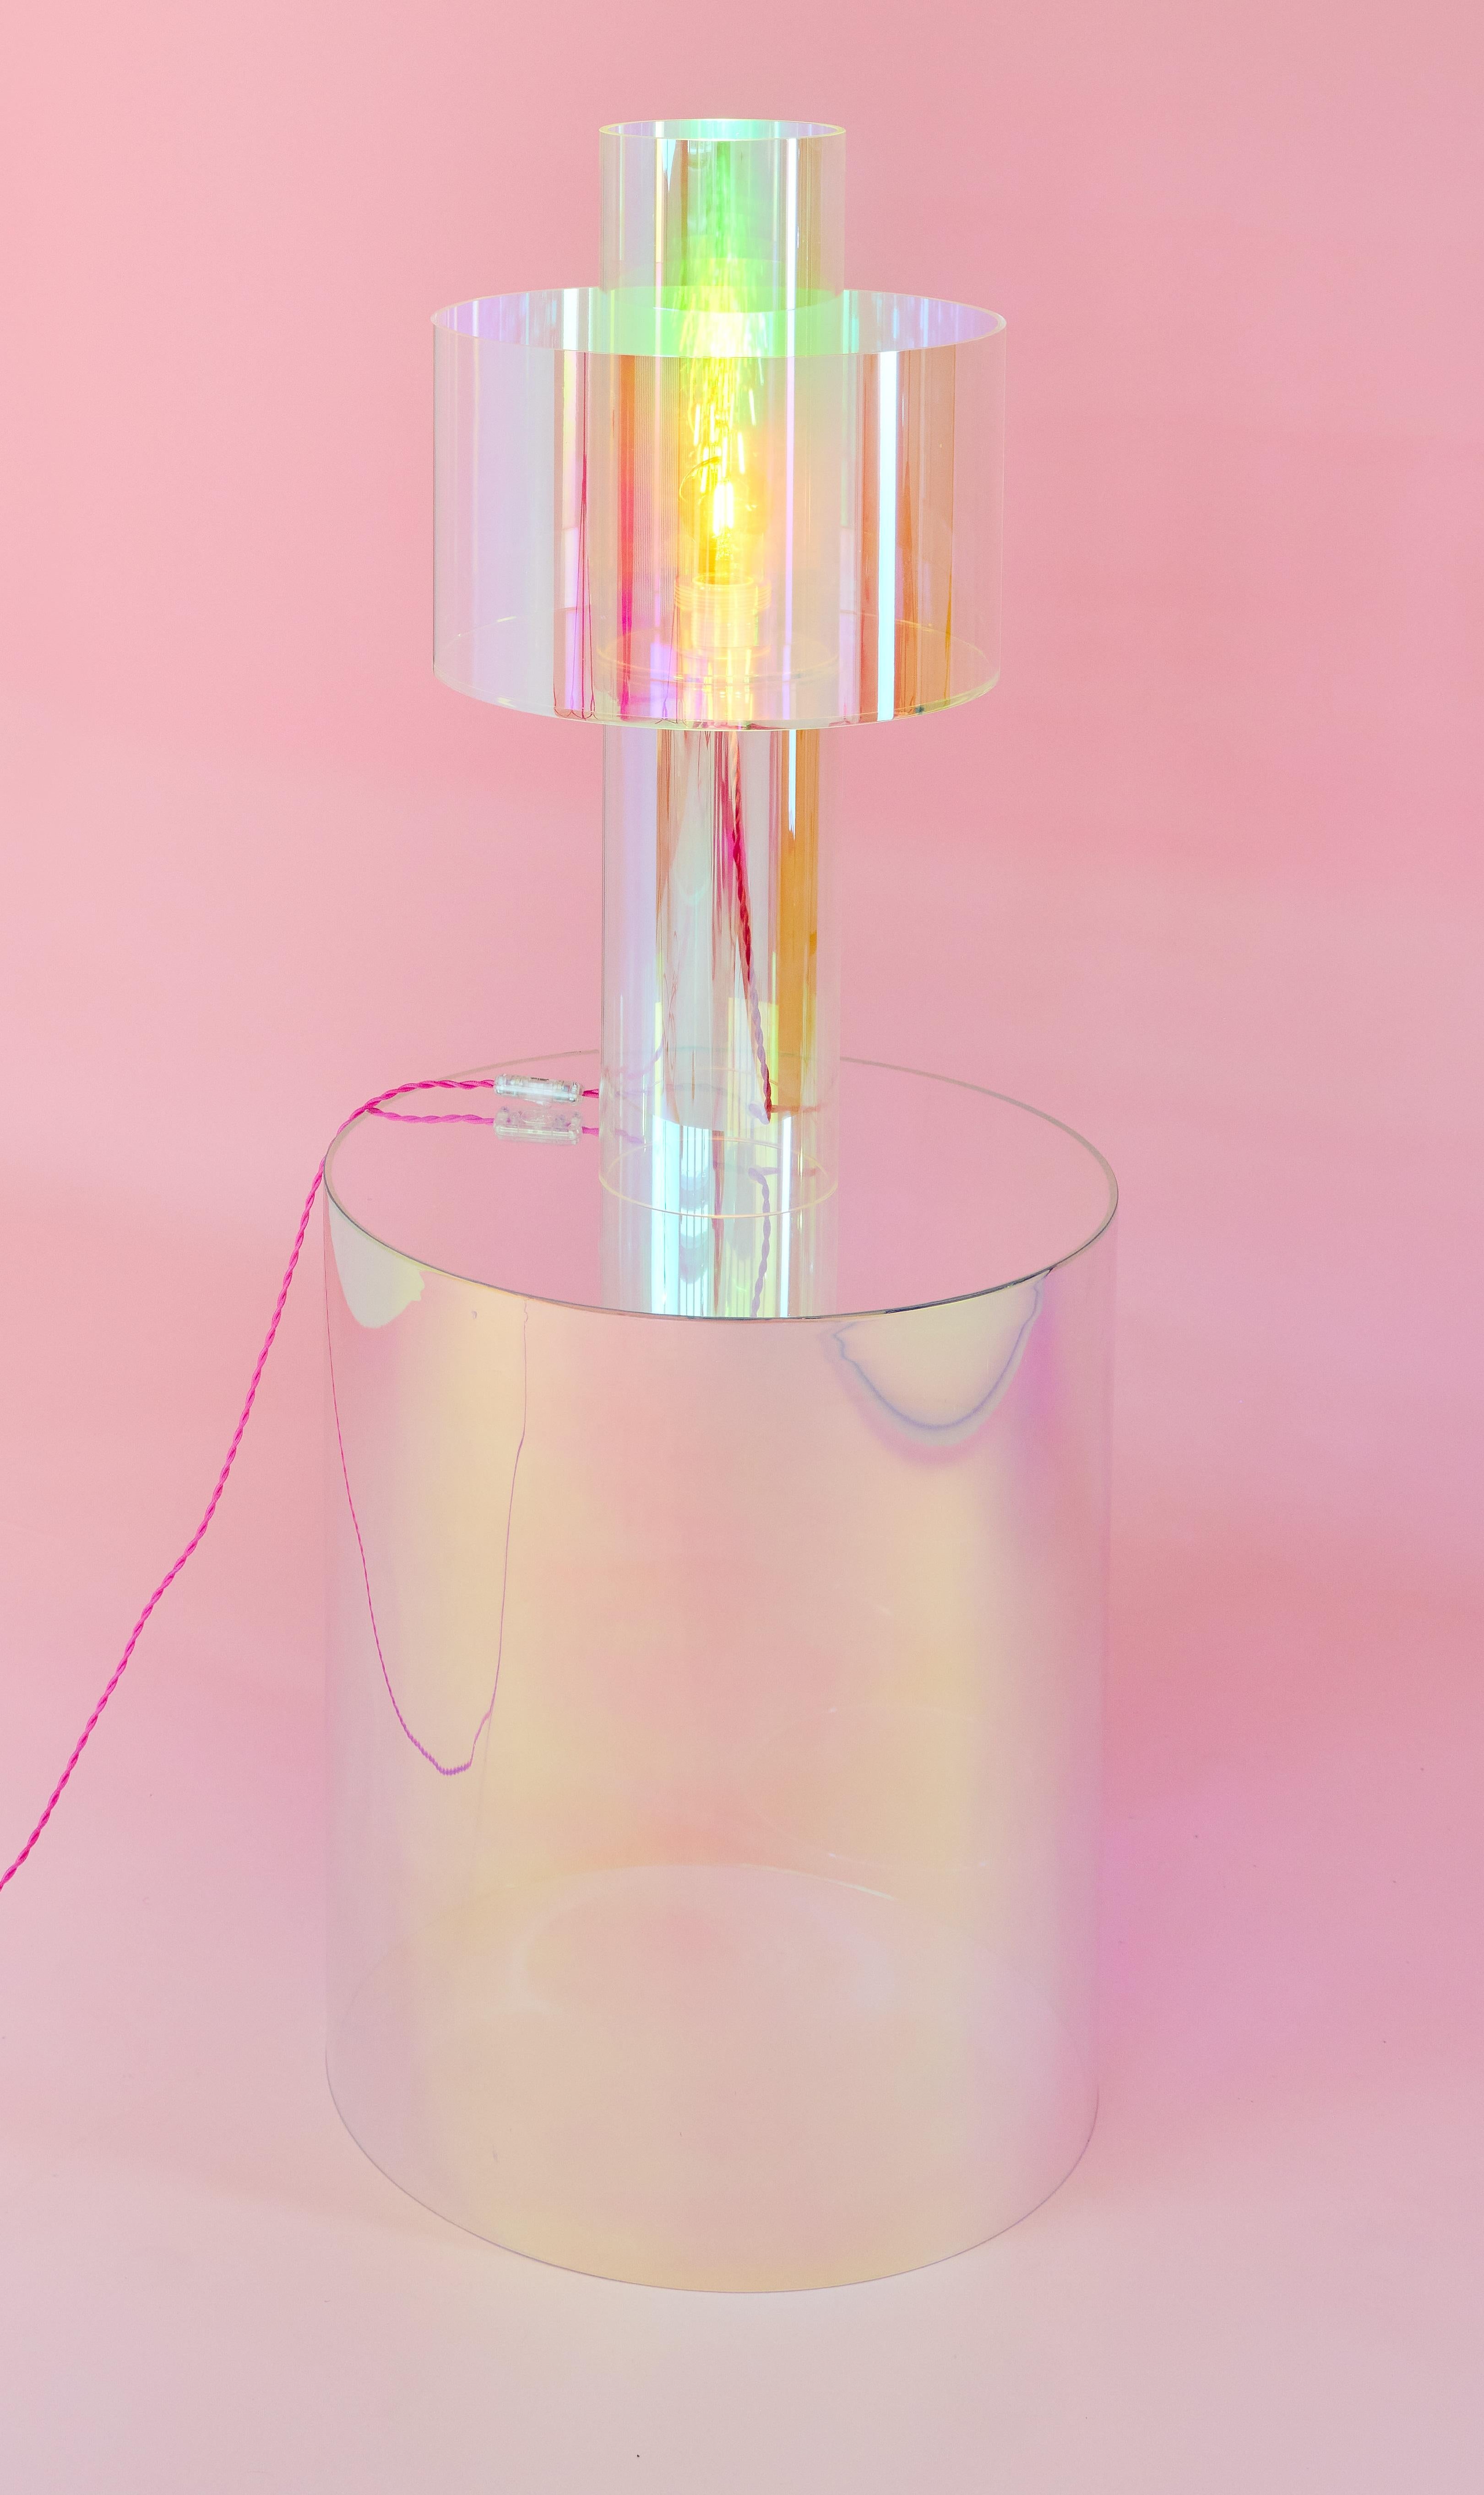 Set of 2 Miami Pink Floating Table Lamp and Tube Side Table by Brajak Vitberg
Materials: Plexiglass and dichroic film.
Dimensions: Table Lamp: Ø 35 x H 44 cm.
Side Table: Ø 50 x H 60 cm. 

The table lamp available with lampshade in pink/blue